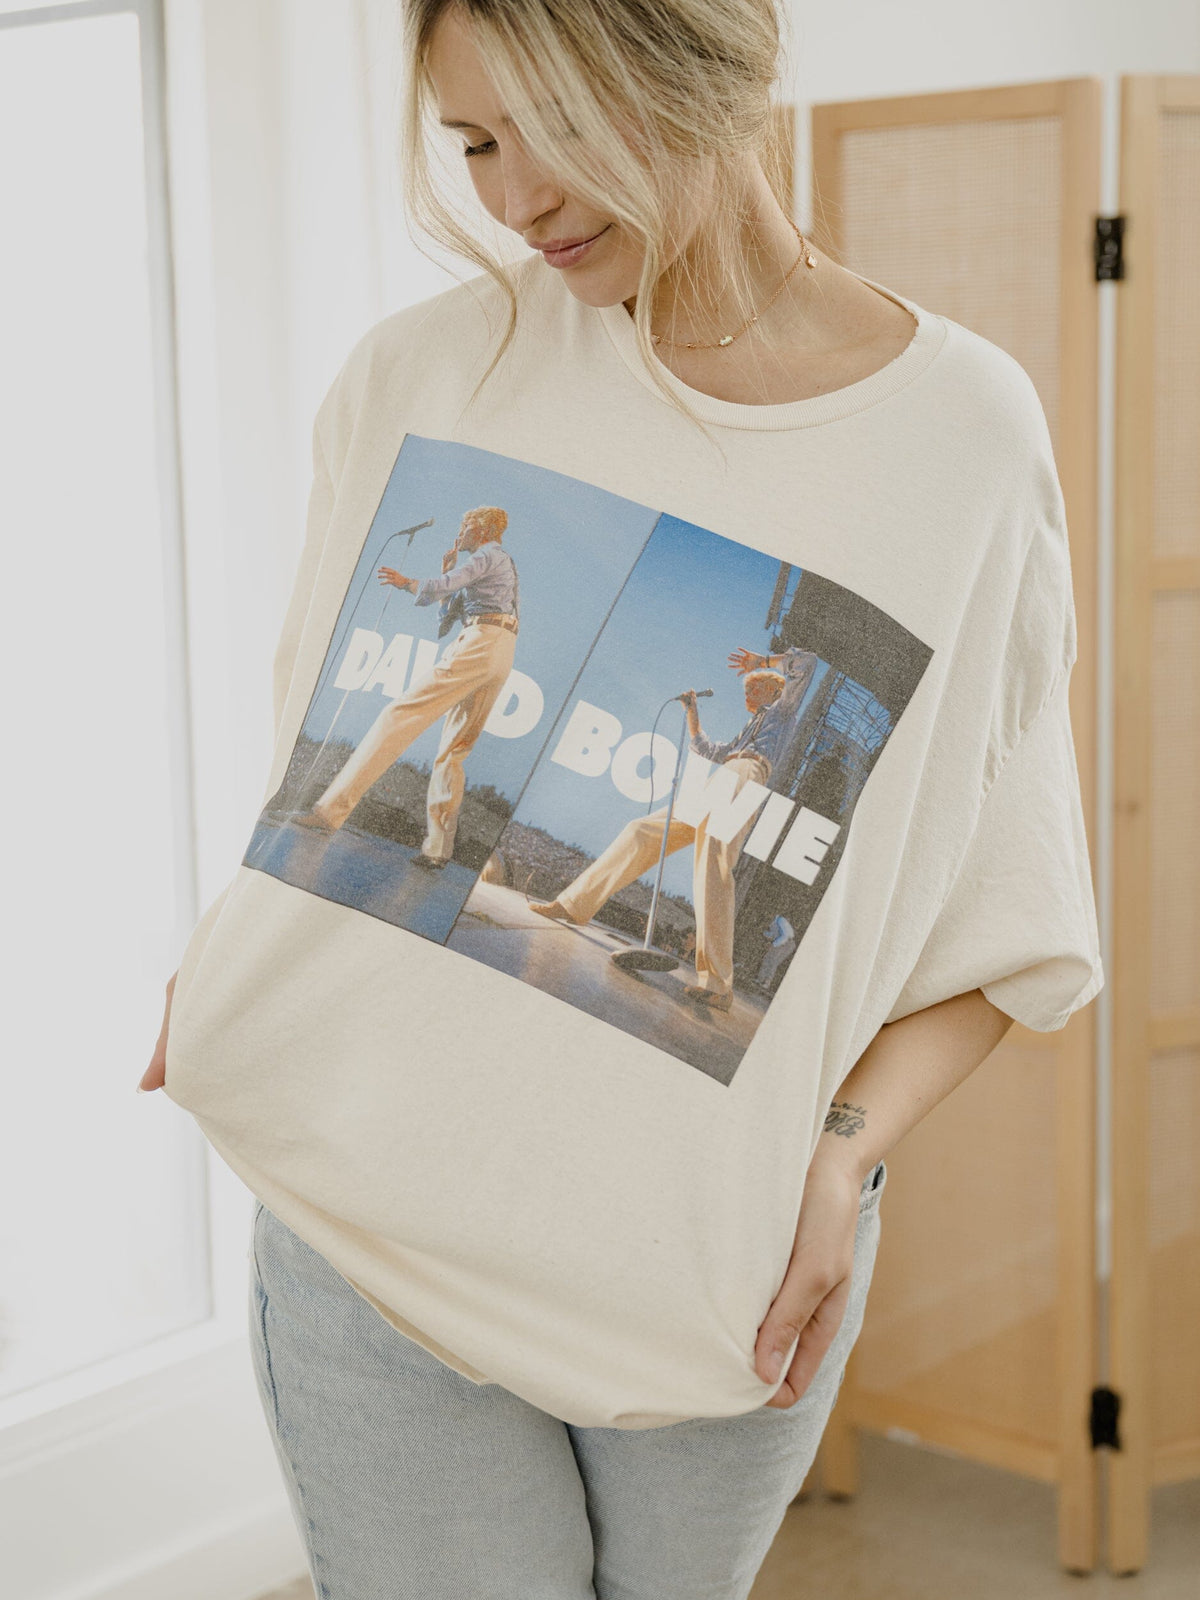 David Bowie 1983 Tour Off White One Size Oversized Tee